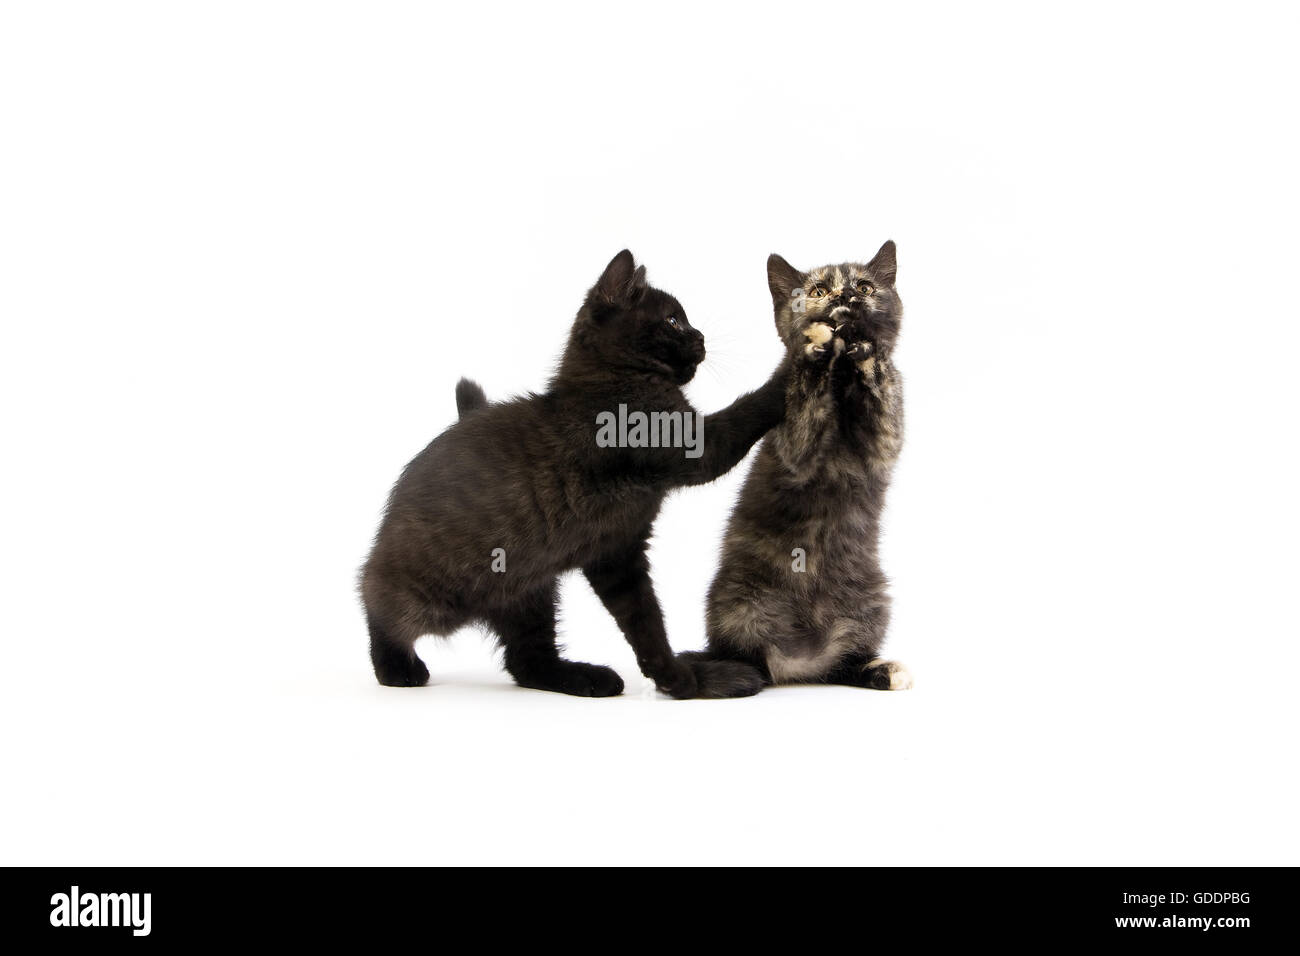 Black and Black Tortoise-shell British Shorthair Domestic Cat, 2 Months Old Kittens playing against White Background Stock Photo